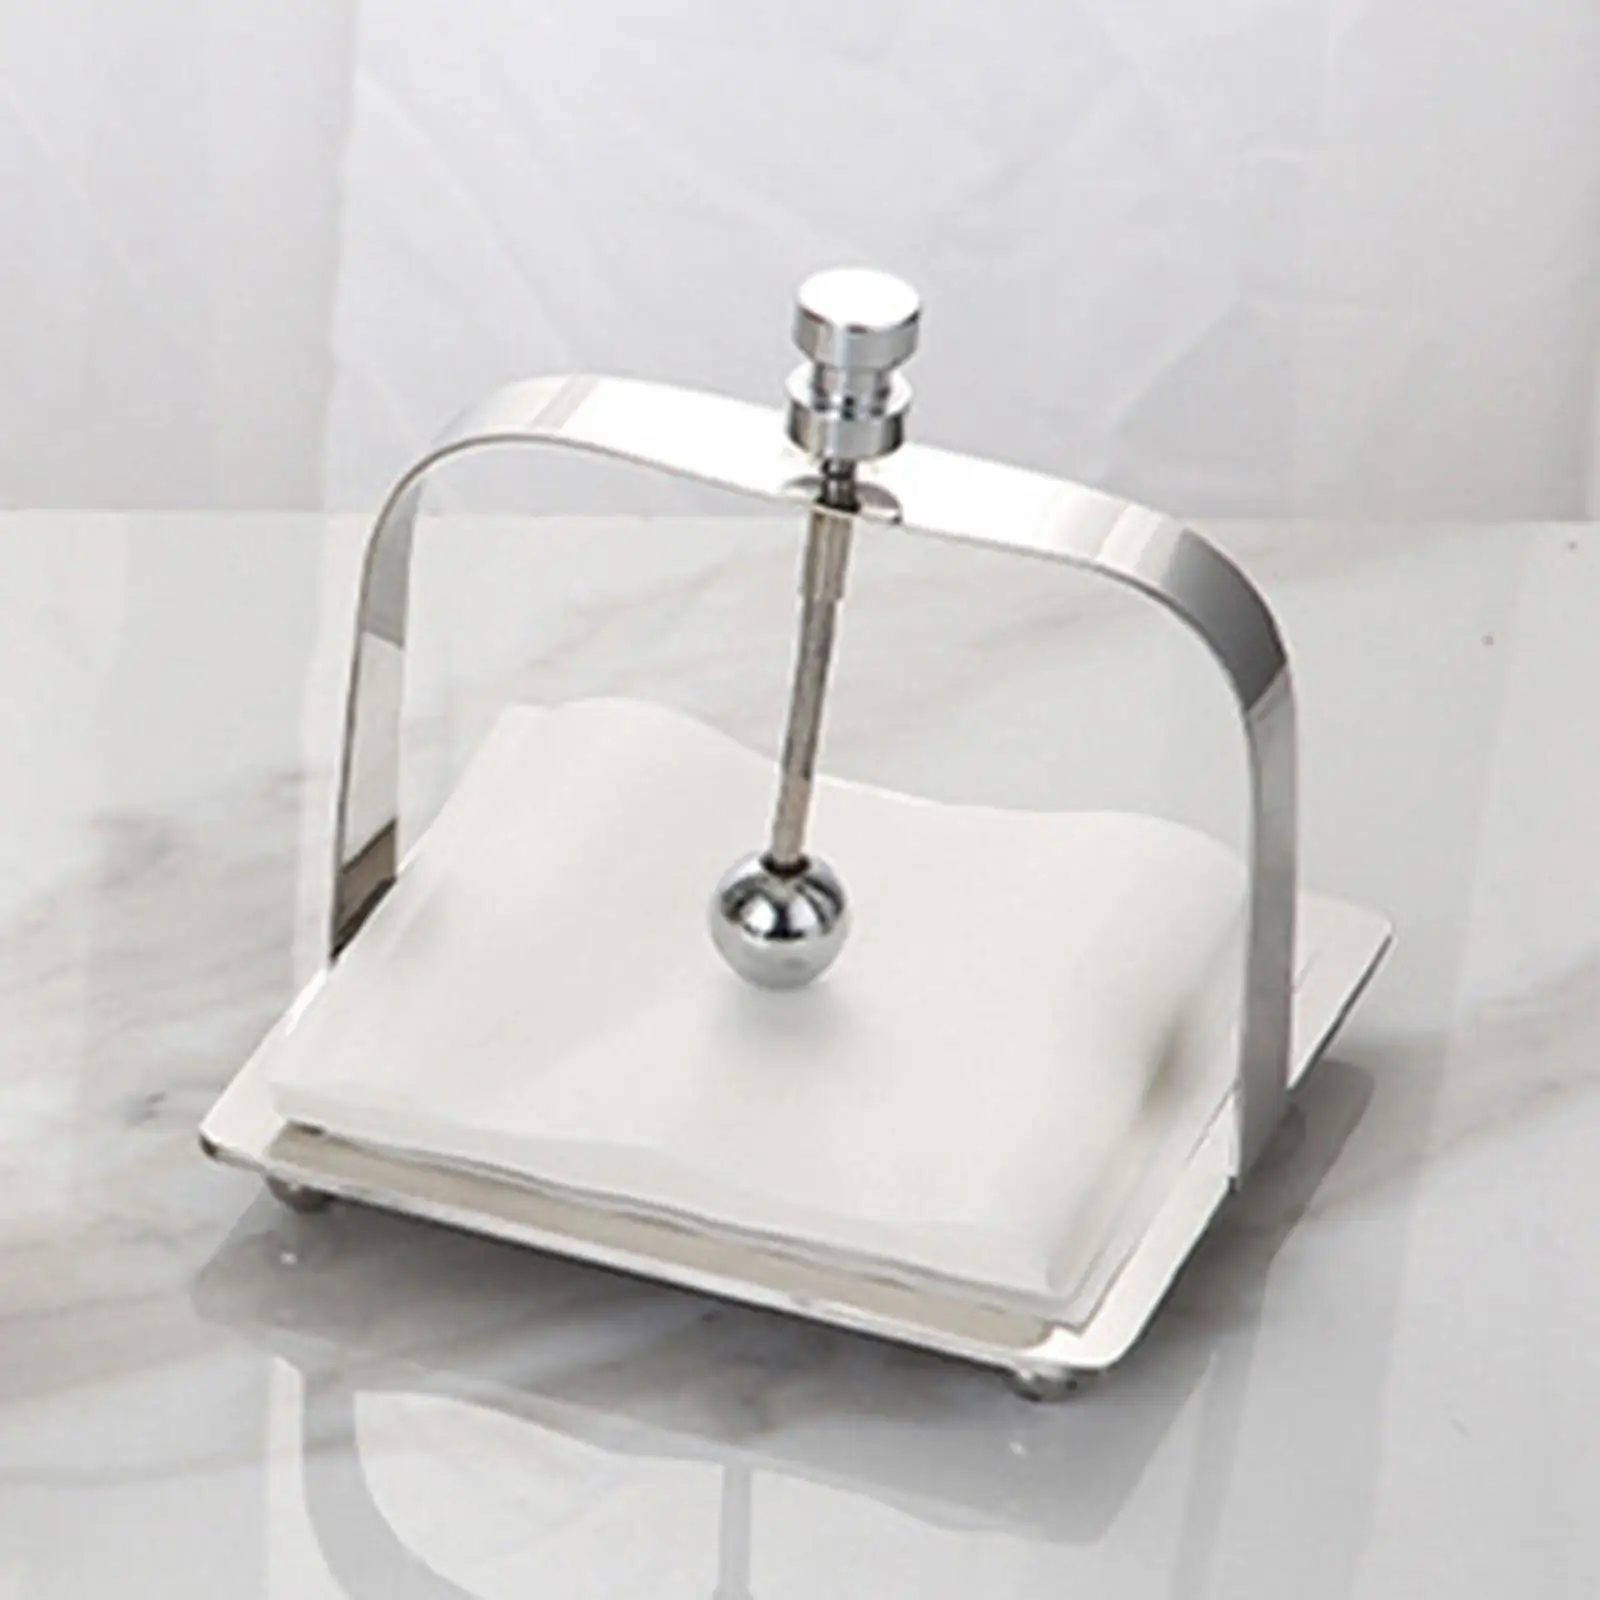 Stainless Steel Napkin Holder Stable Base Table Organizer for Cafe Clubs